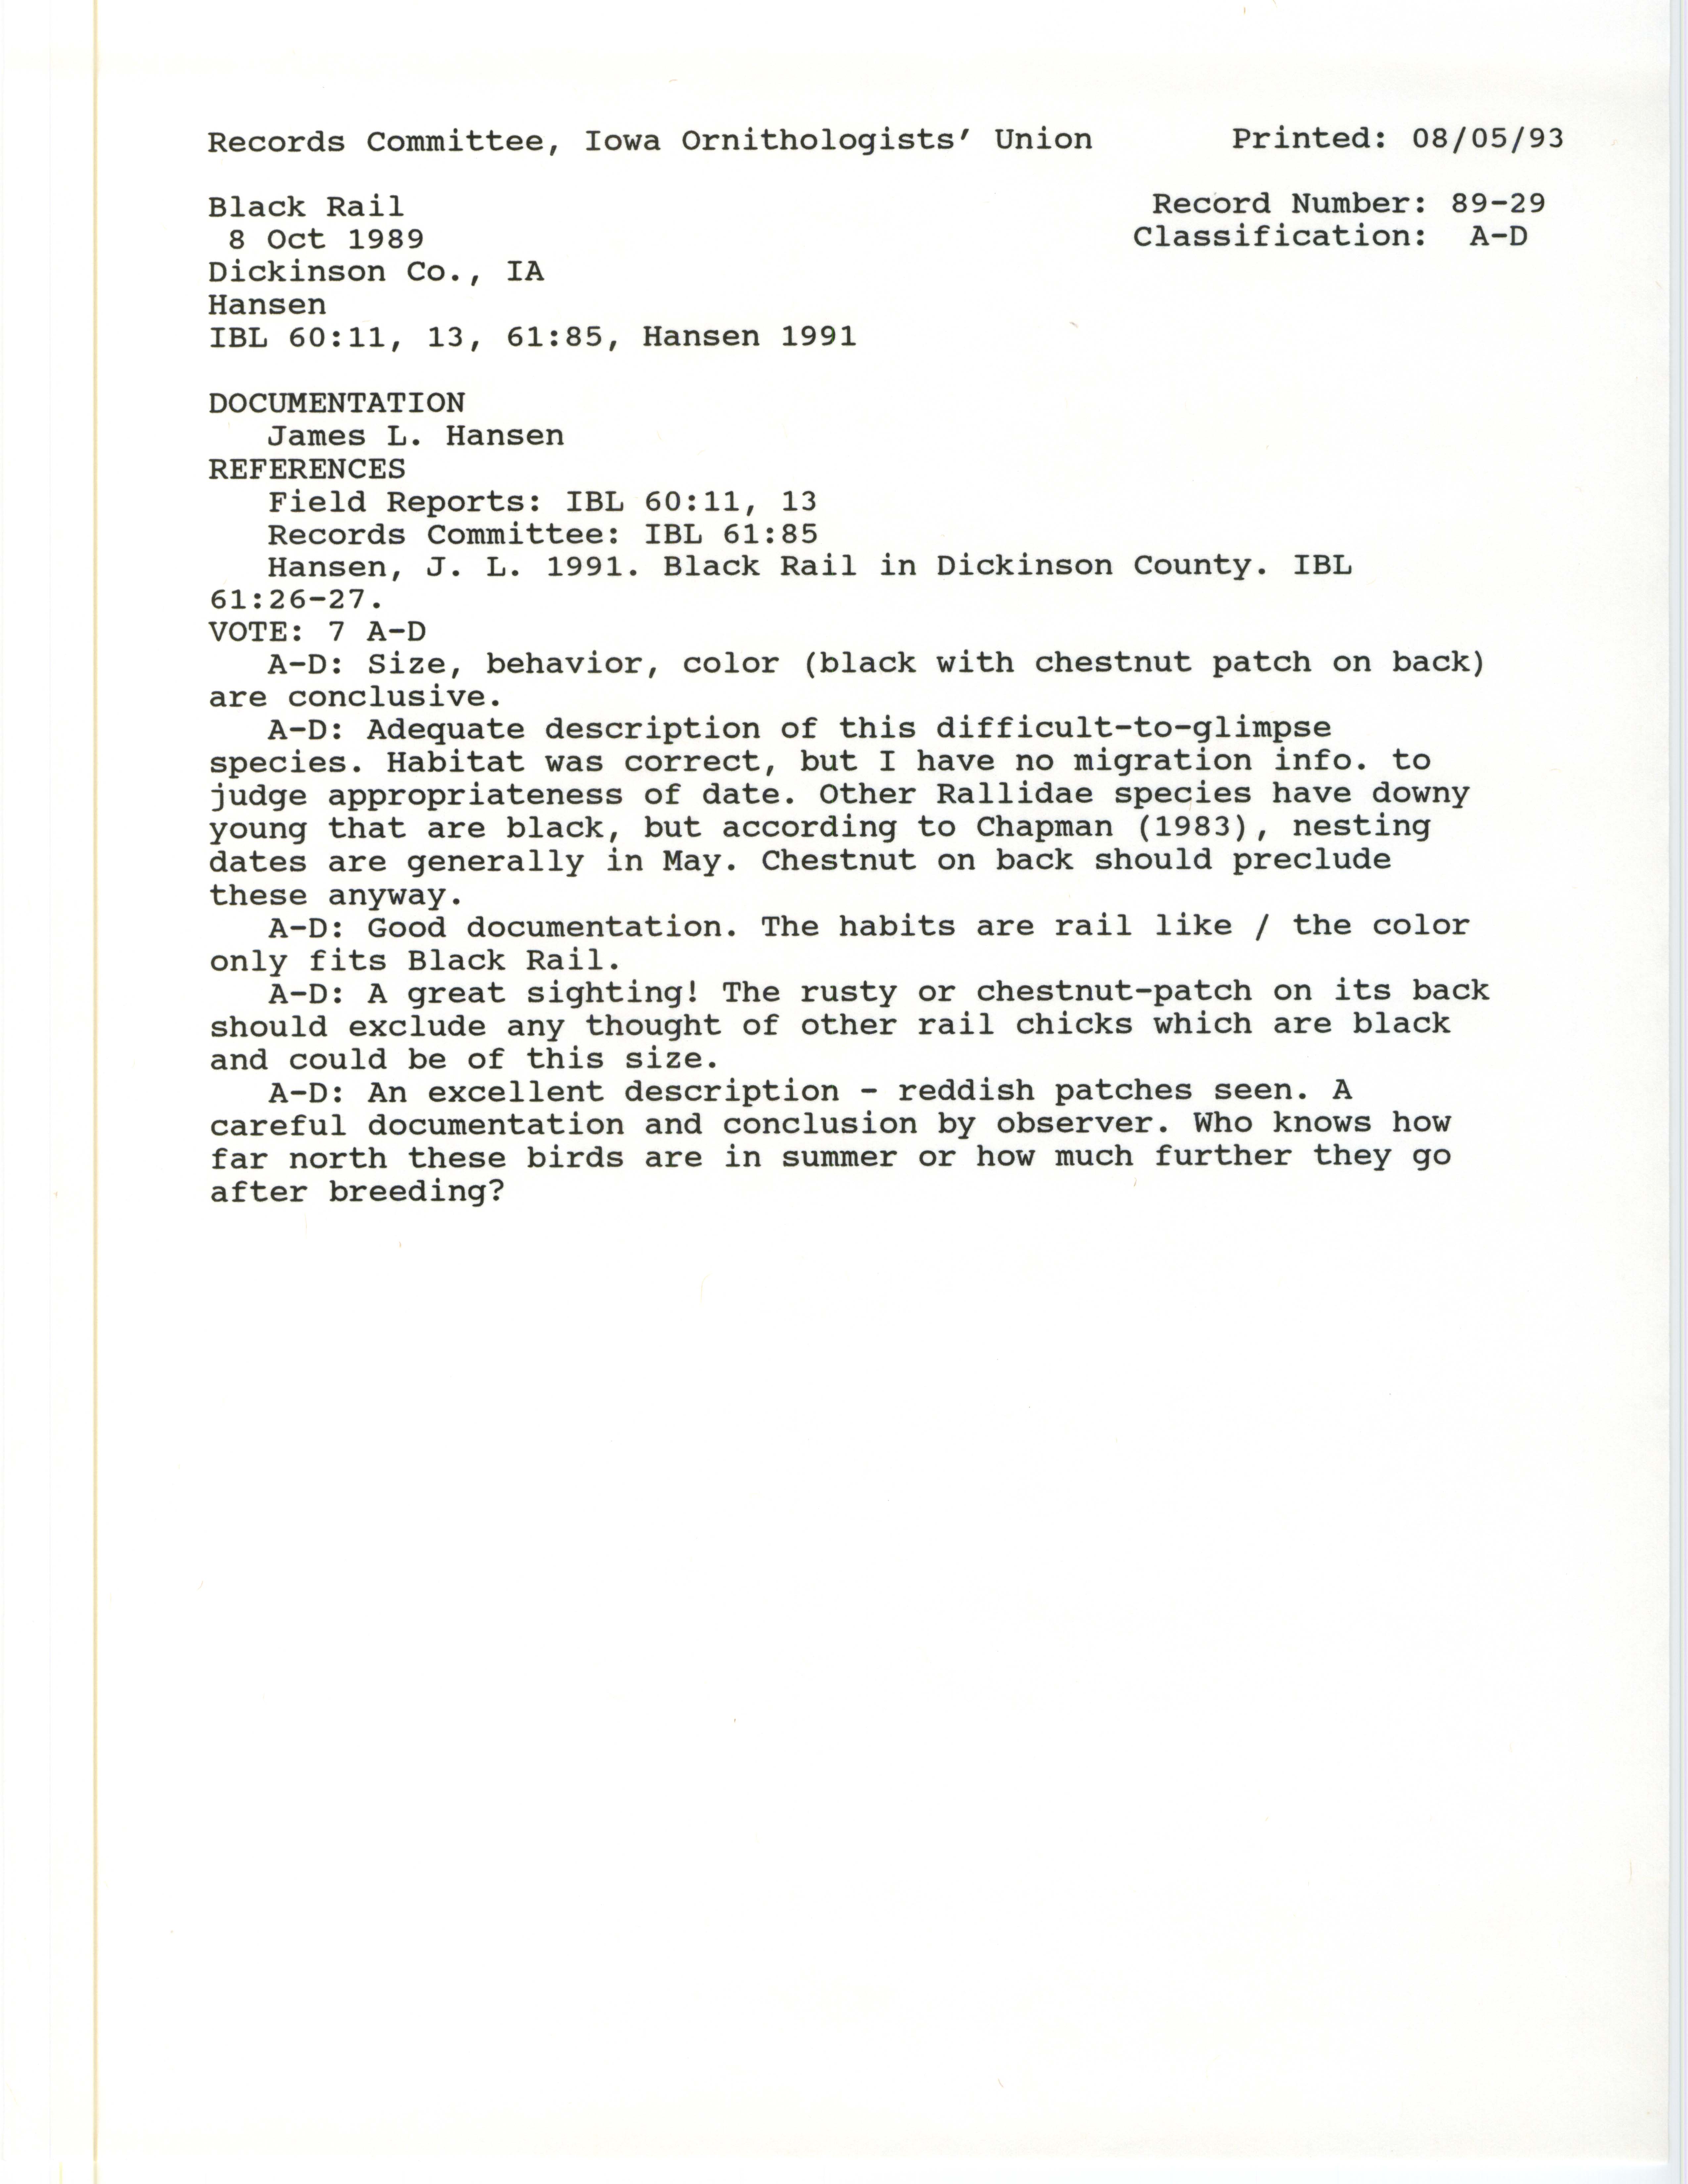 Records Committee review for rare bird sighting of Black Rail at McBreen Marsh Wildlife Area, 1989